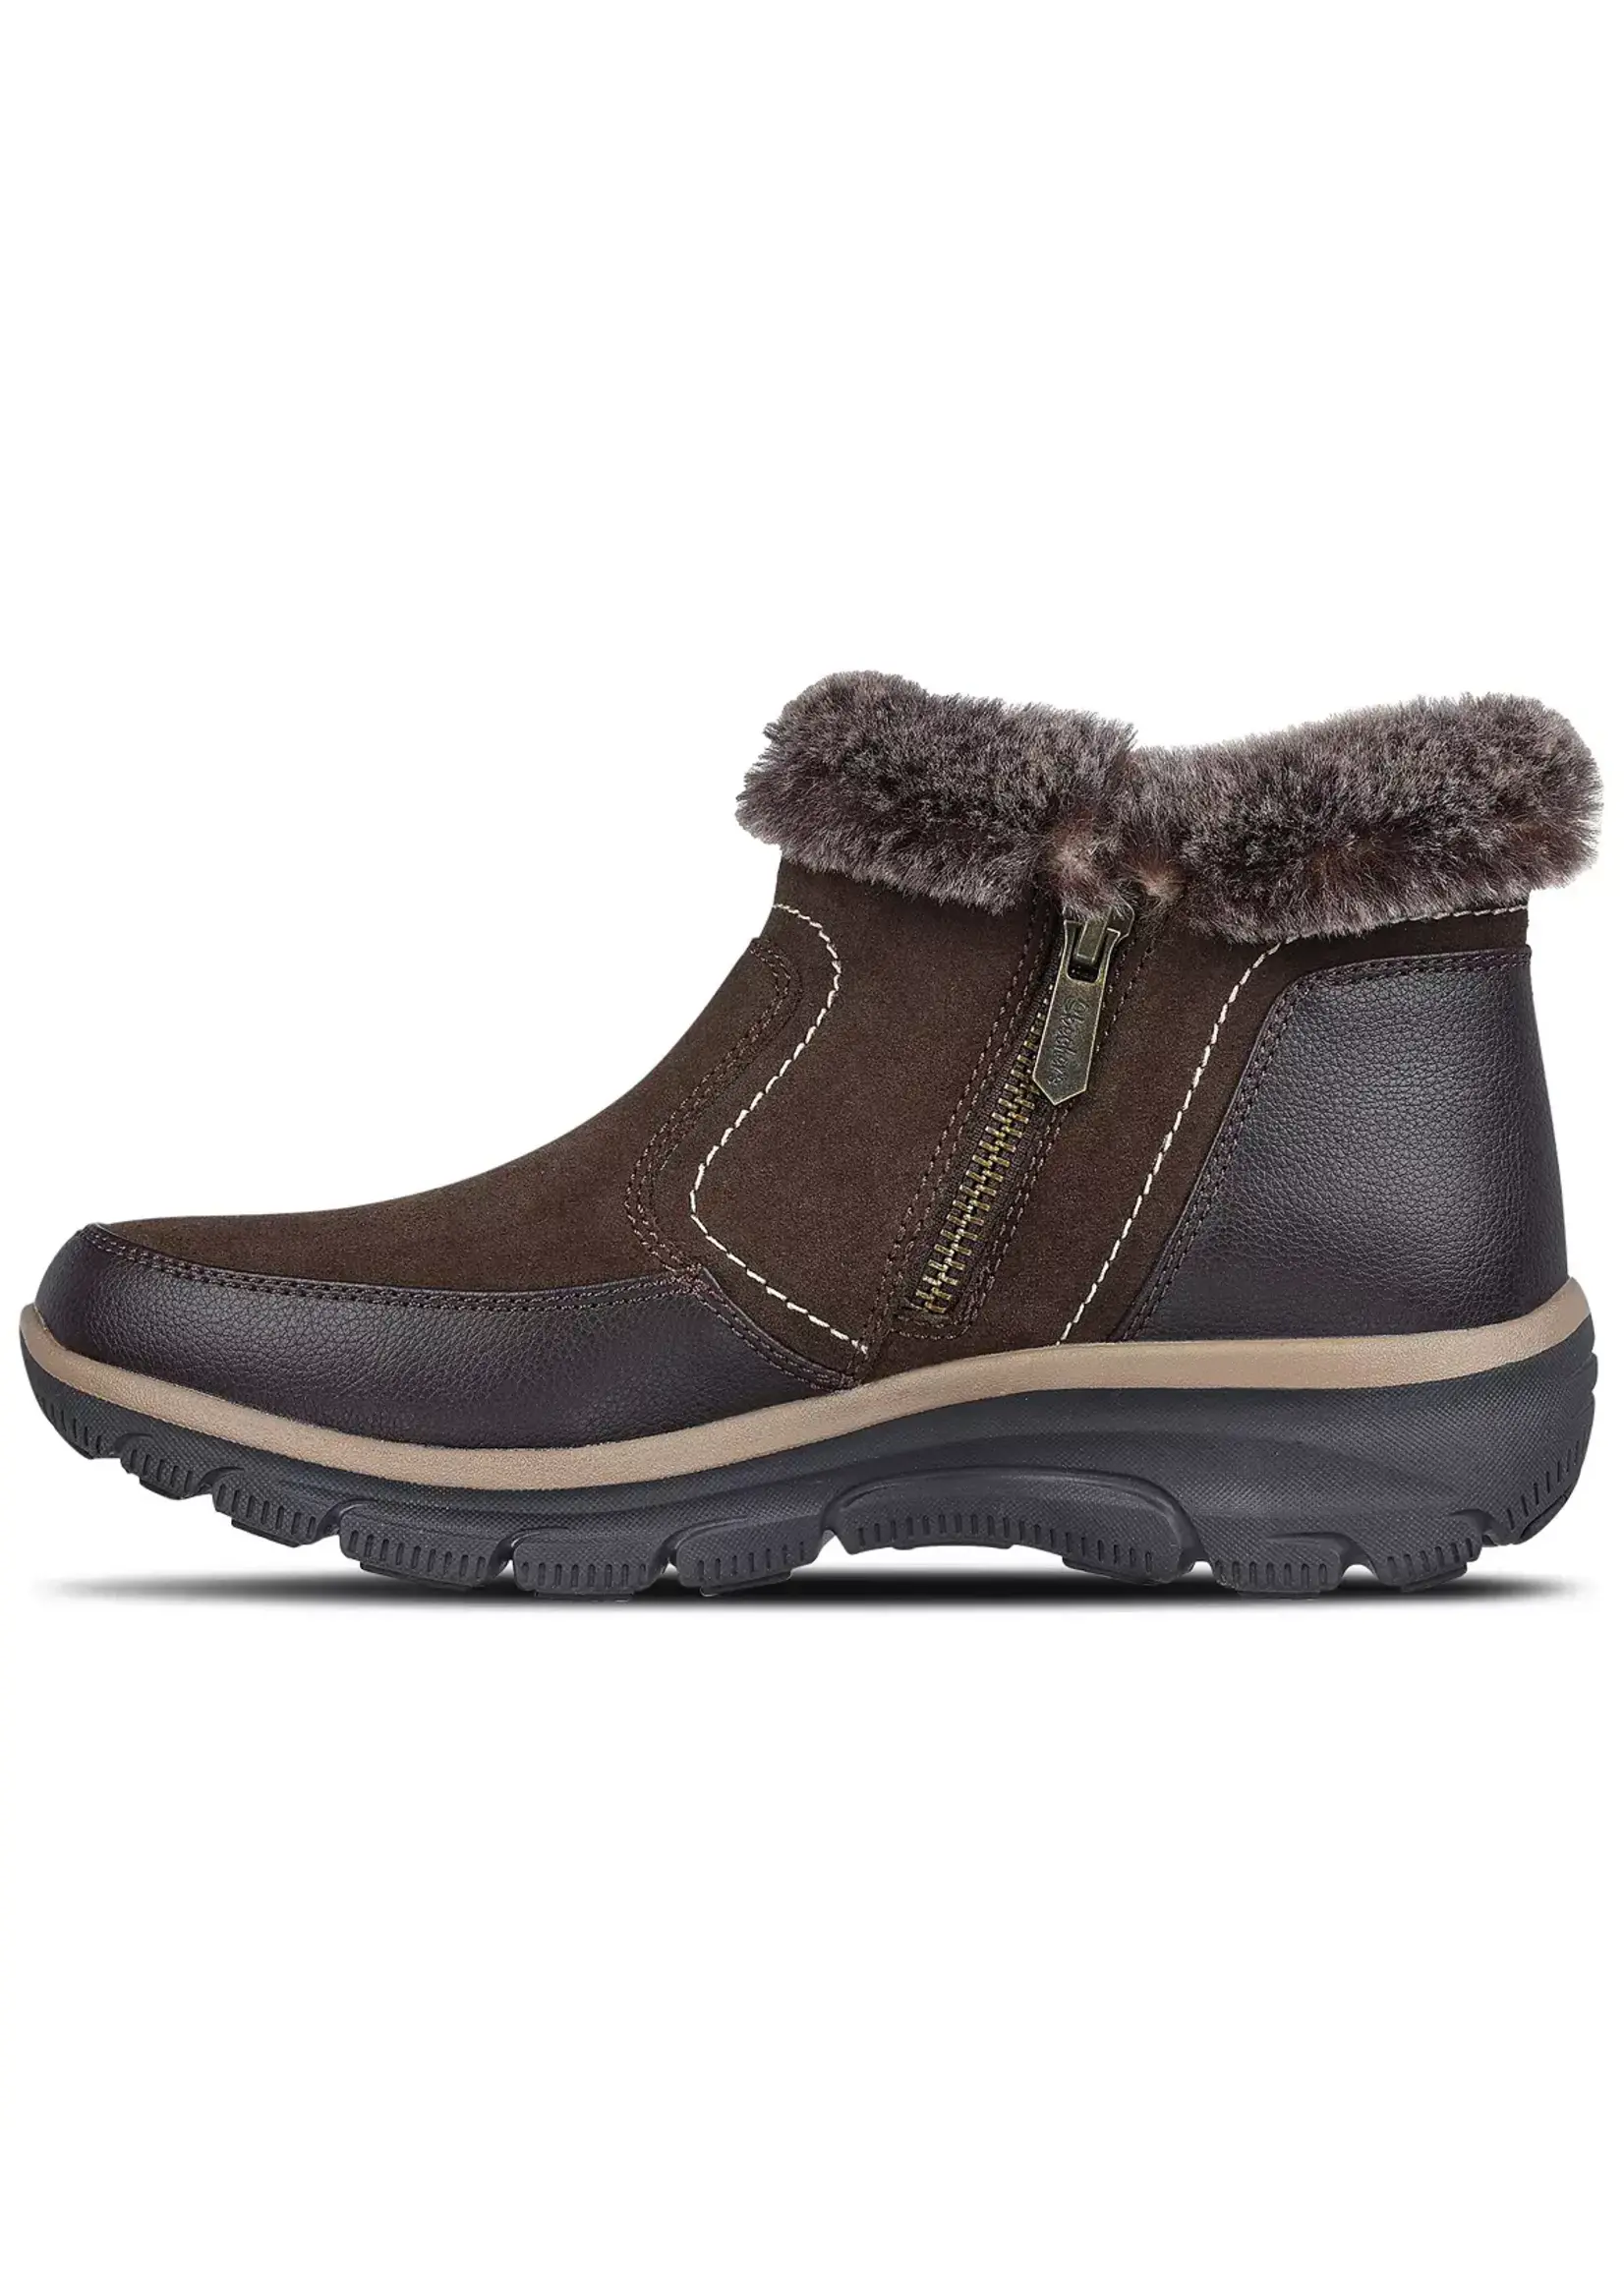 Skechers Women's Easy Going Warm Escape Fashion Boot Chocolate - SHOE PLUS  - Low Prices - Express Shipping - 100s of Items to Choose From!